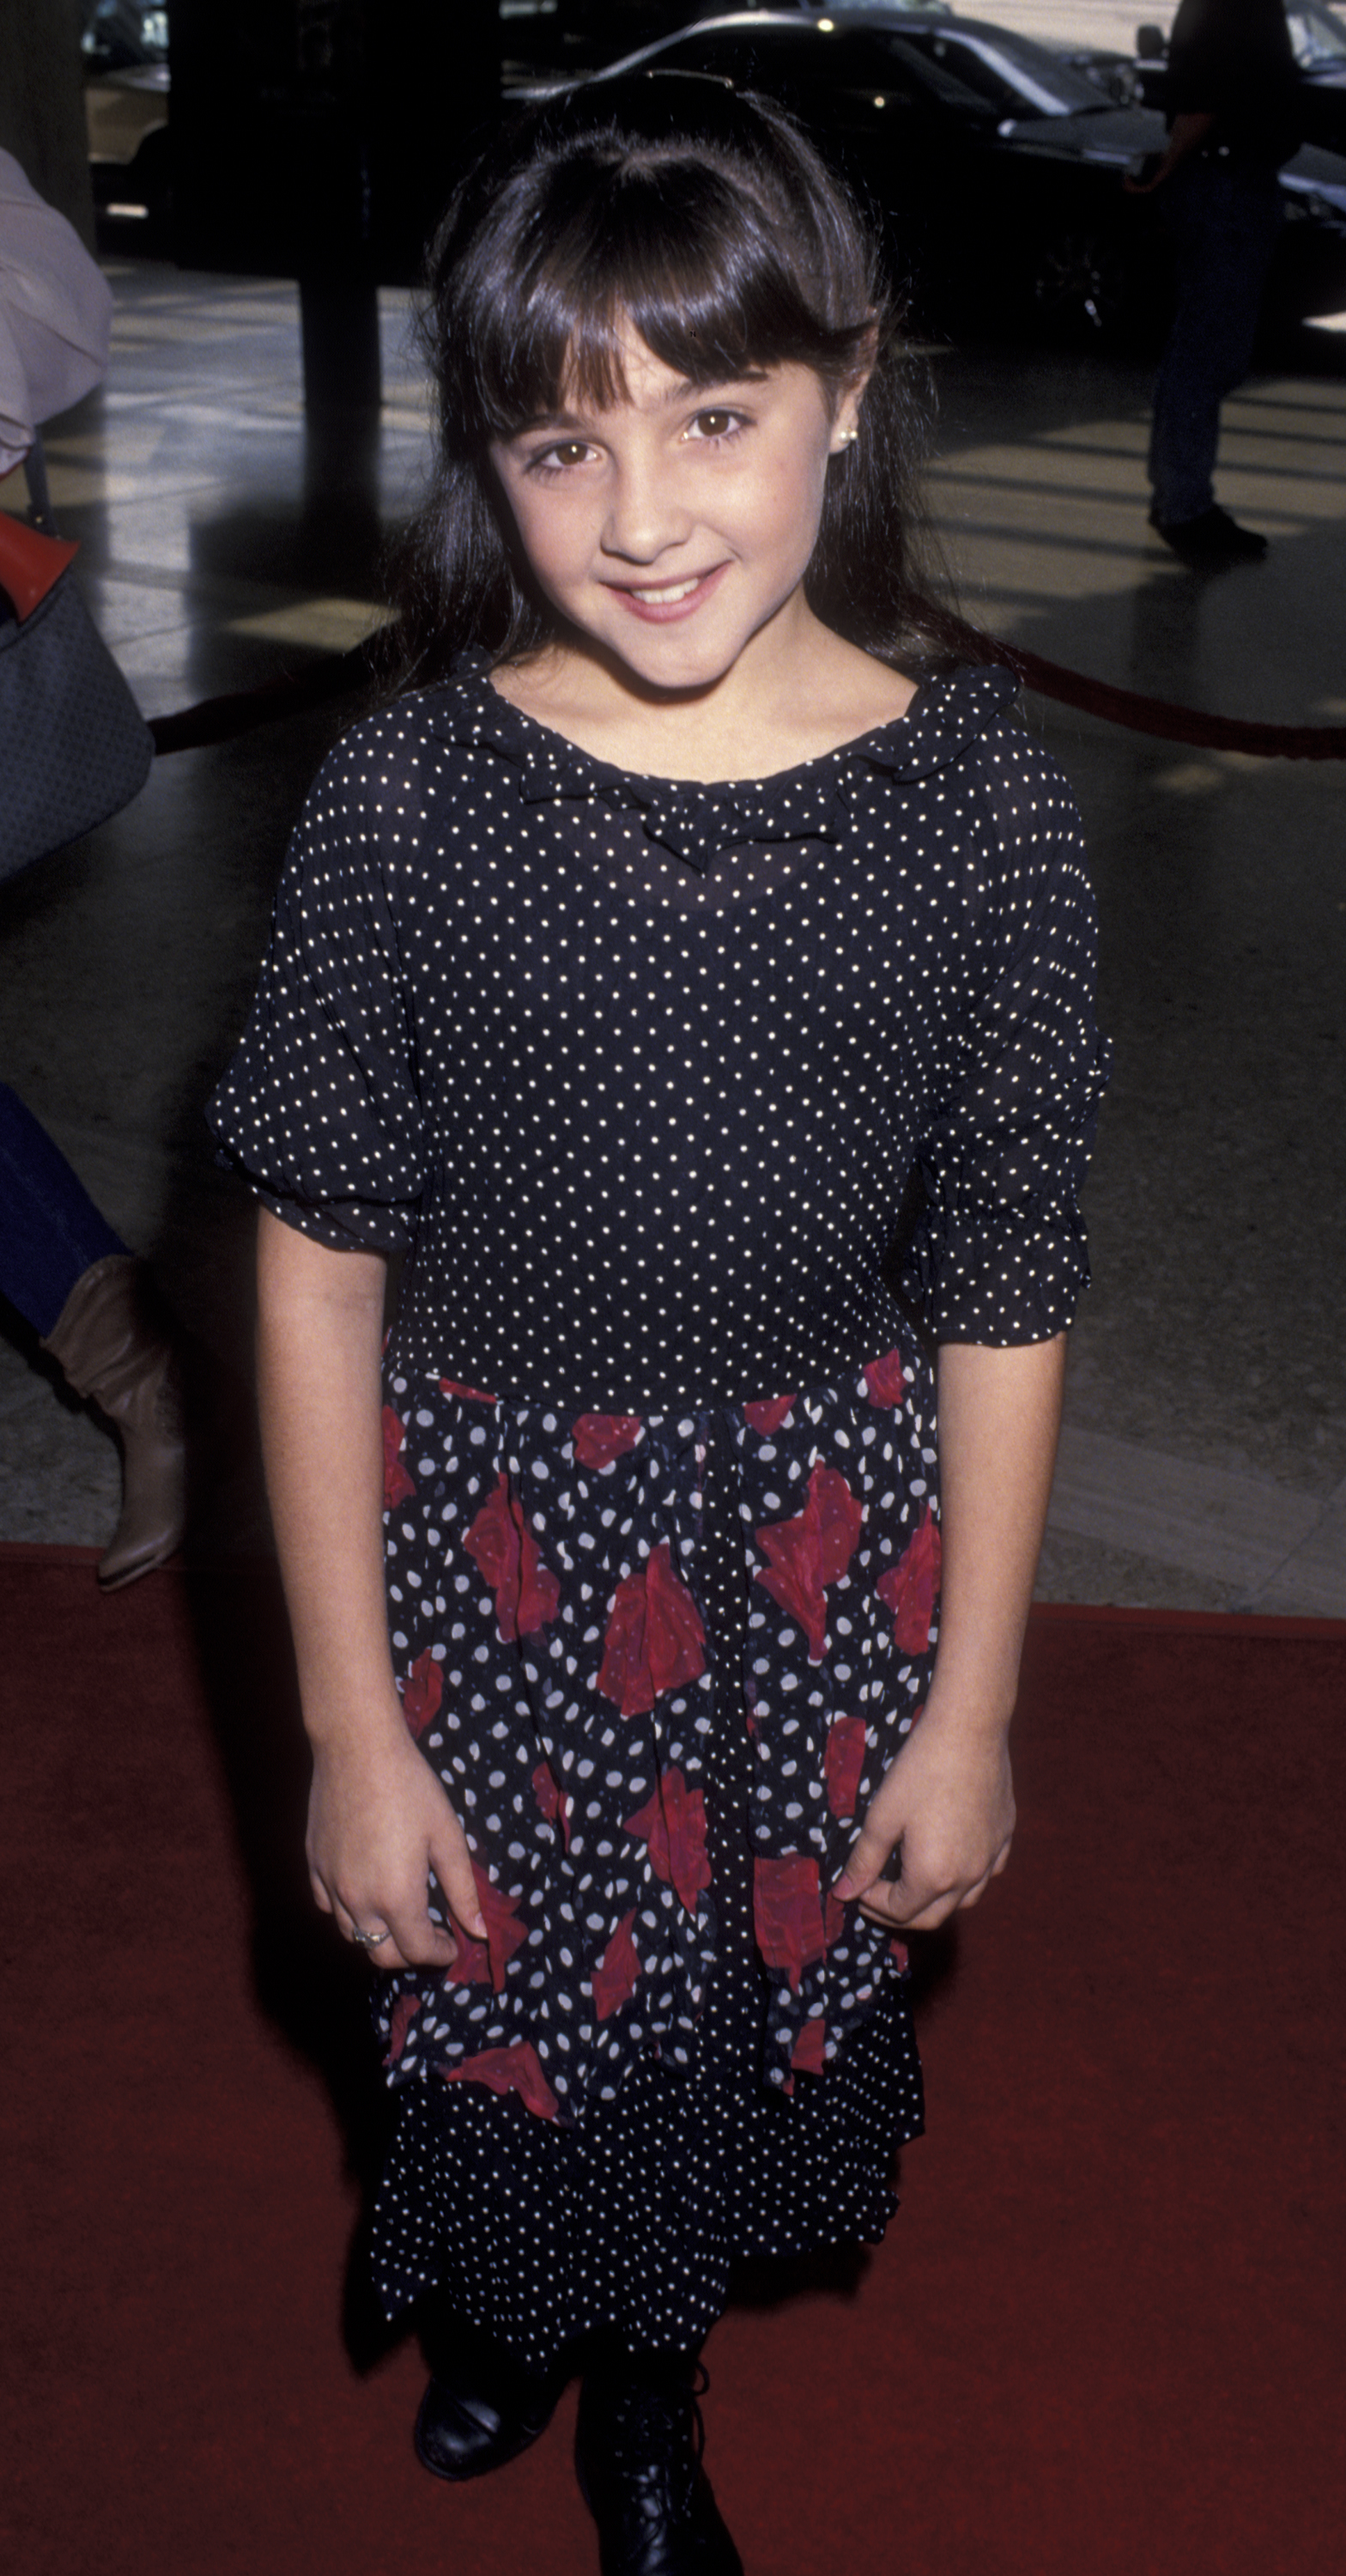 Alisan Porter attends the "Home Alone 2 - Lost in New York" premiere on November 15, 1992 in Century City, California | Source: Getty Images